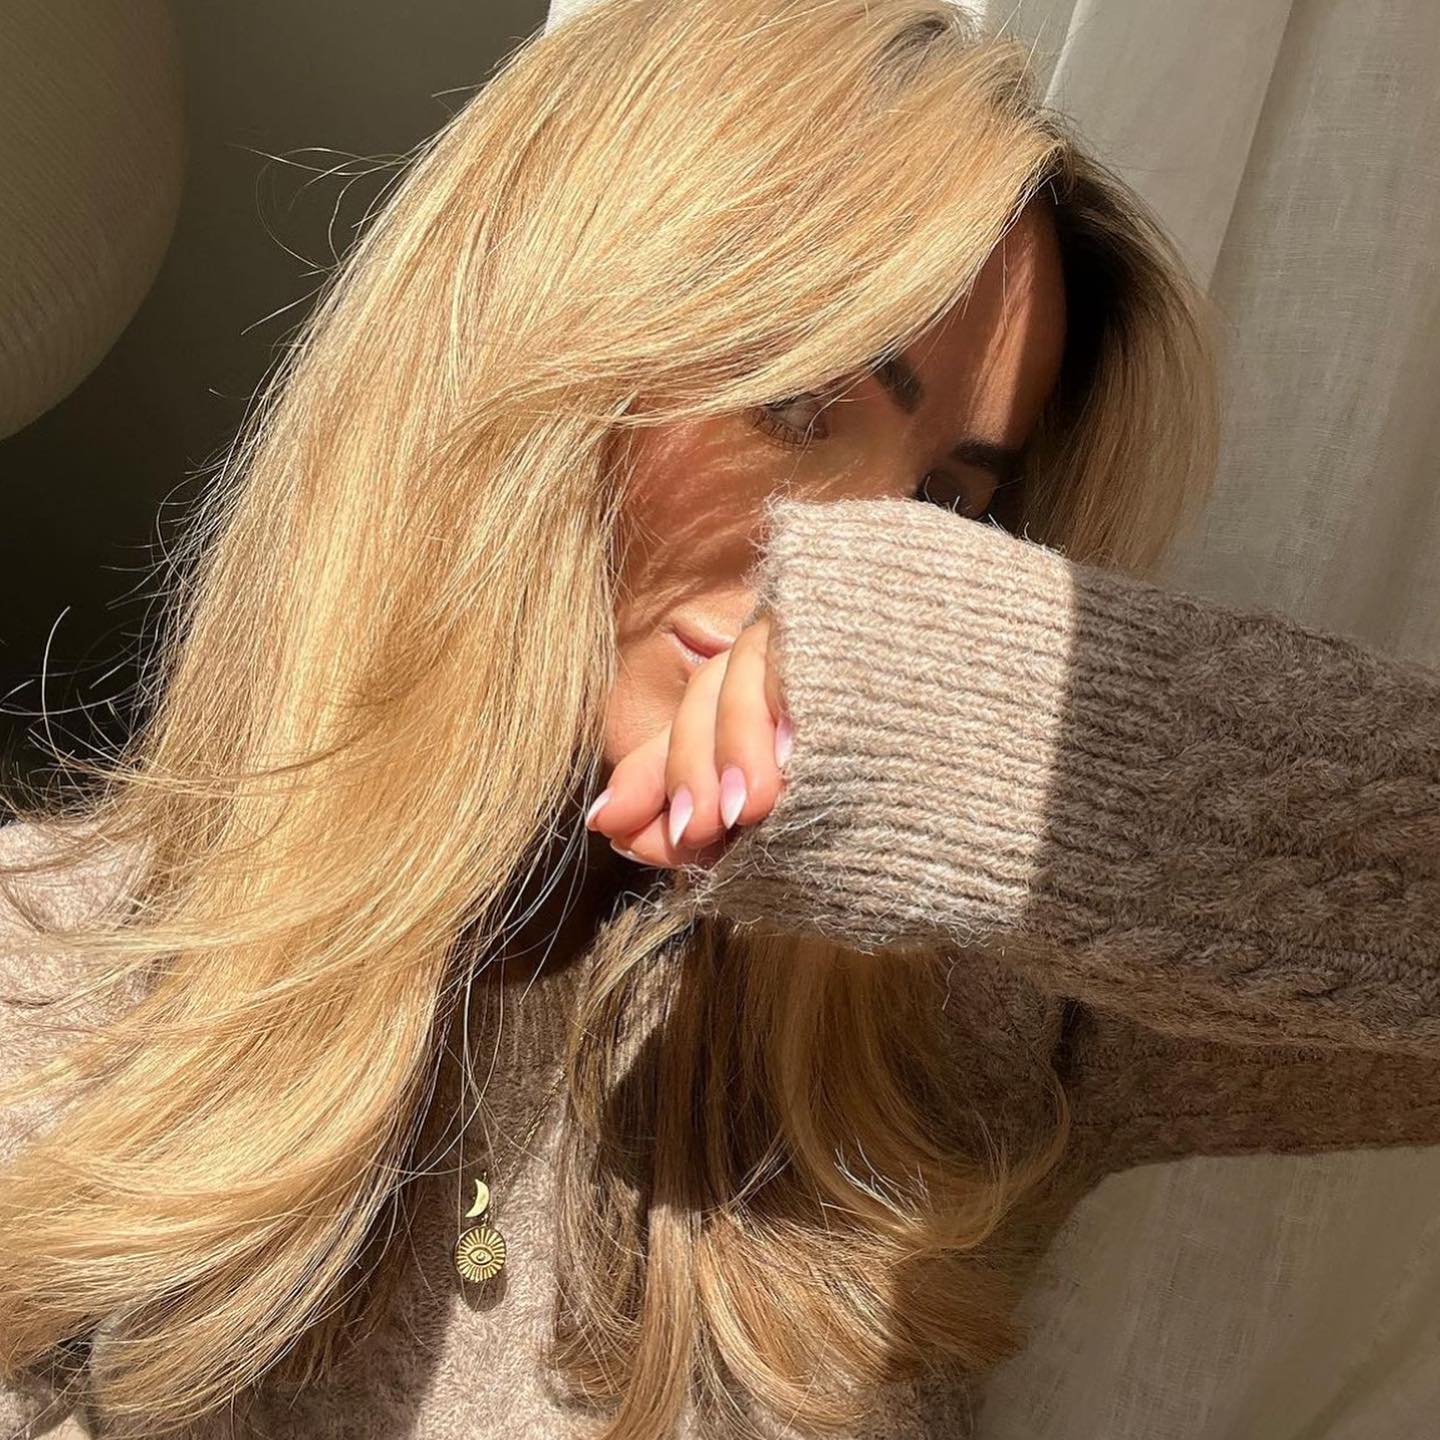 Photo from rapunzelofsweden with the caption Don’t miss out💥
Right now, we’re offering 15% off Tape Extensions when you buy at least 4 packs

Beauty @victoriasstil using Tape Extensions - Hazelnut Caramel Balayage & Cool Blonde Colormelt🤍

#hair #hairextensions #hairart #hairfashion #hairgoals #haircolor #style #dontmissout #hairideas #hairlove #haircut #hairtrends